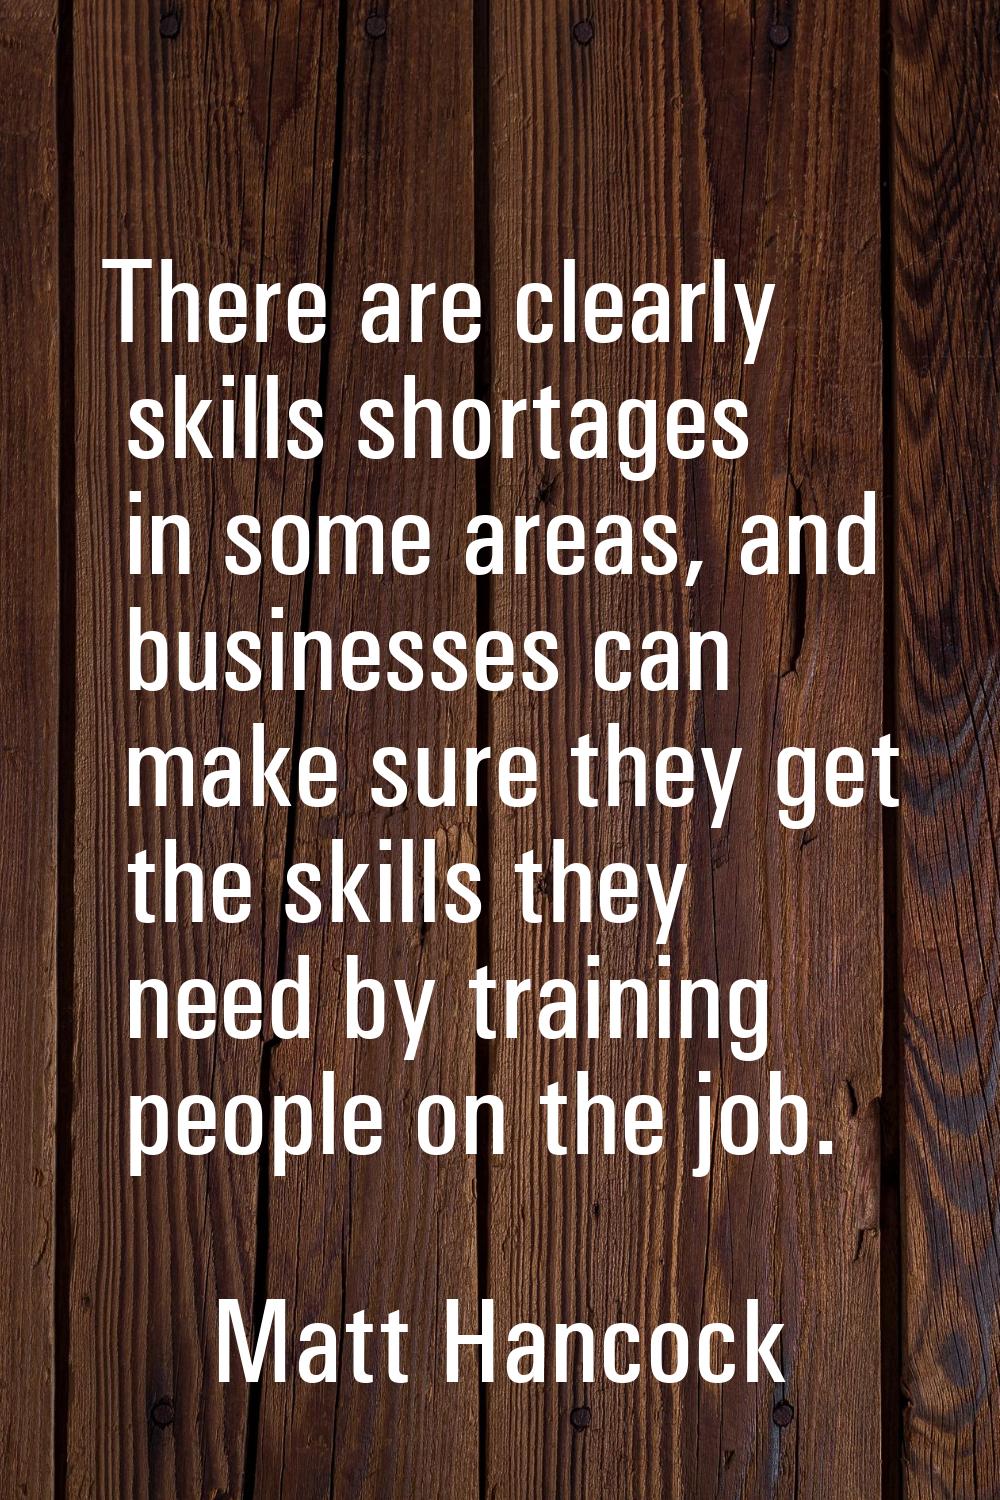 There are clearly skills shortages in some areas, and businesses can make sure they get the skills 